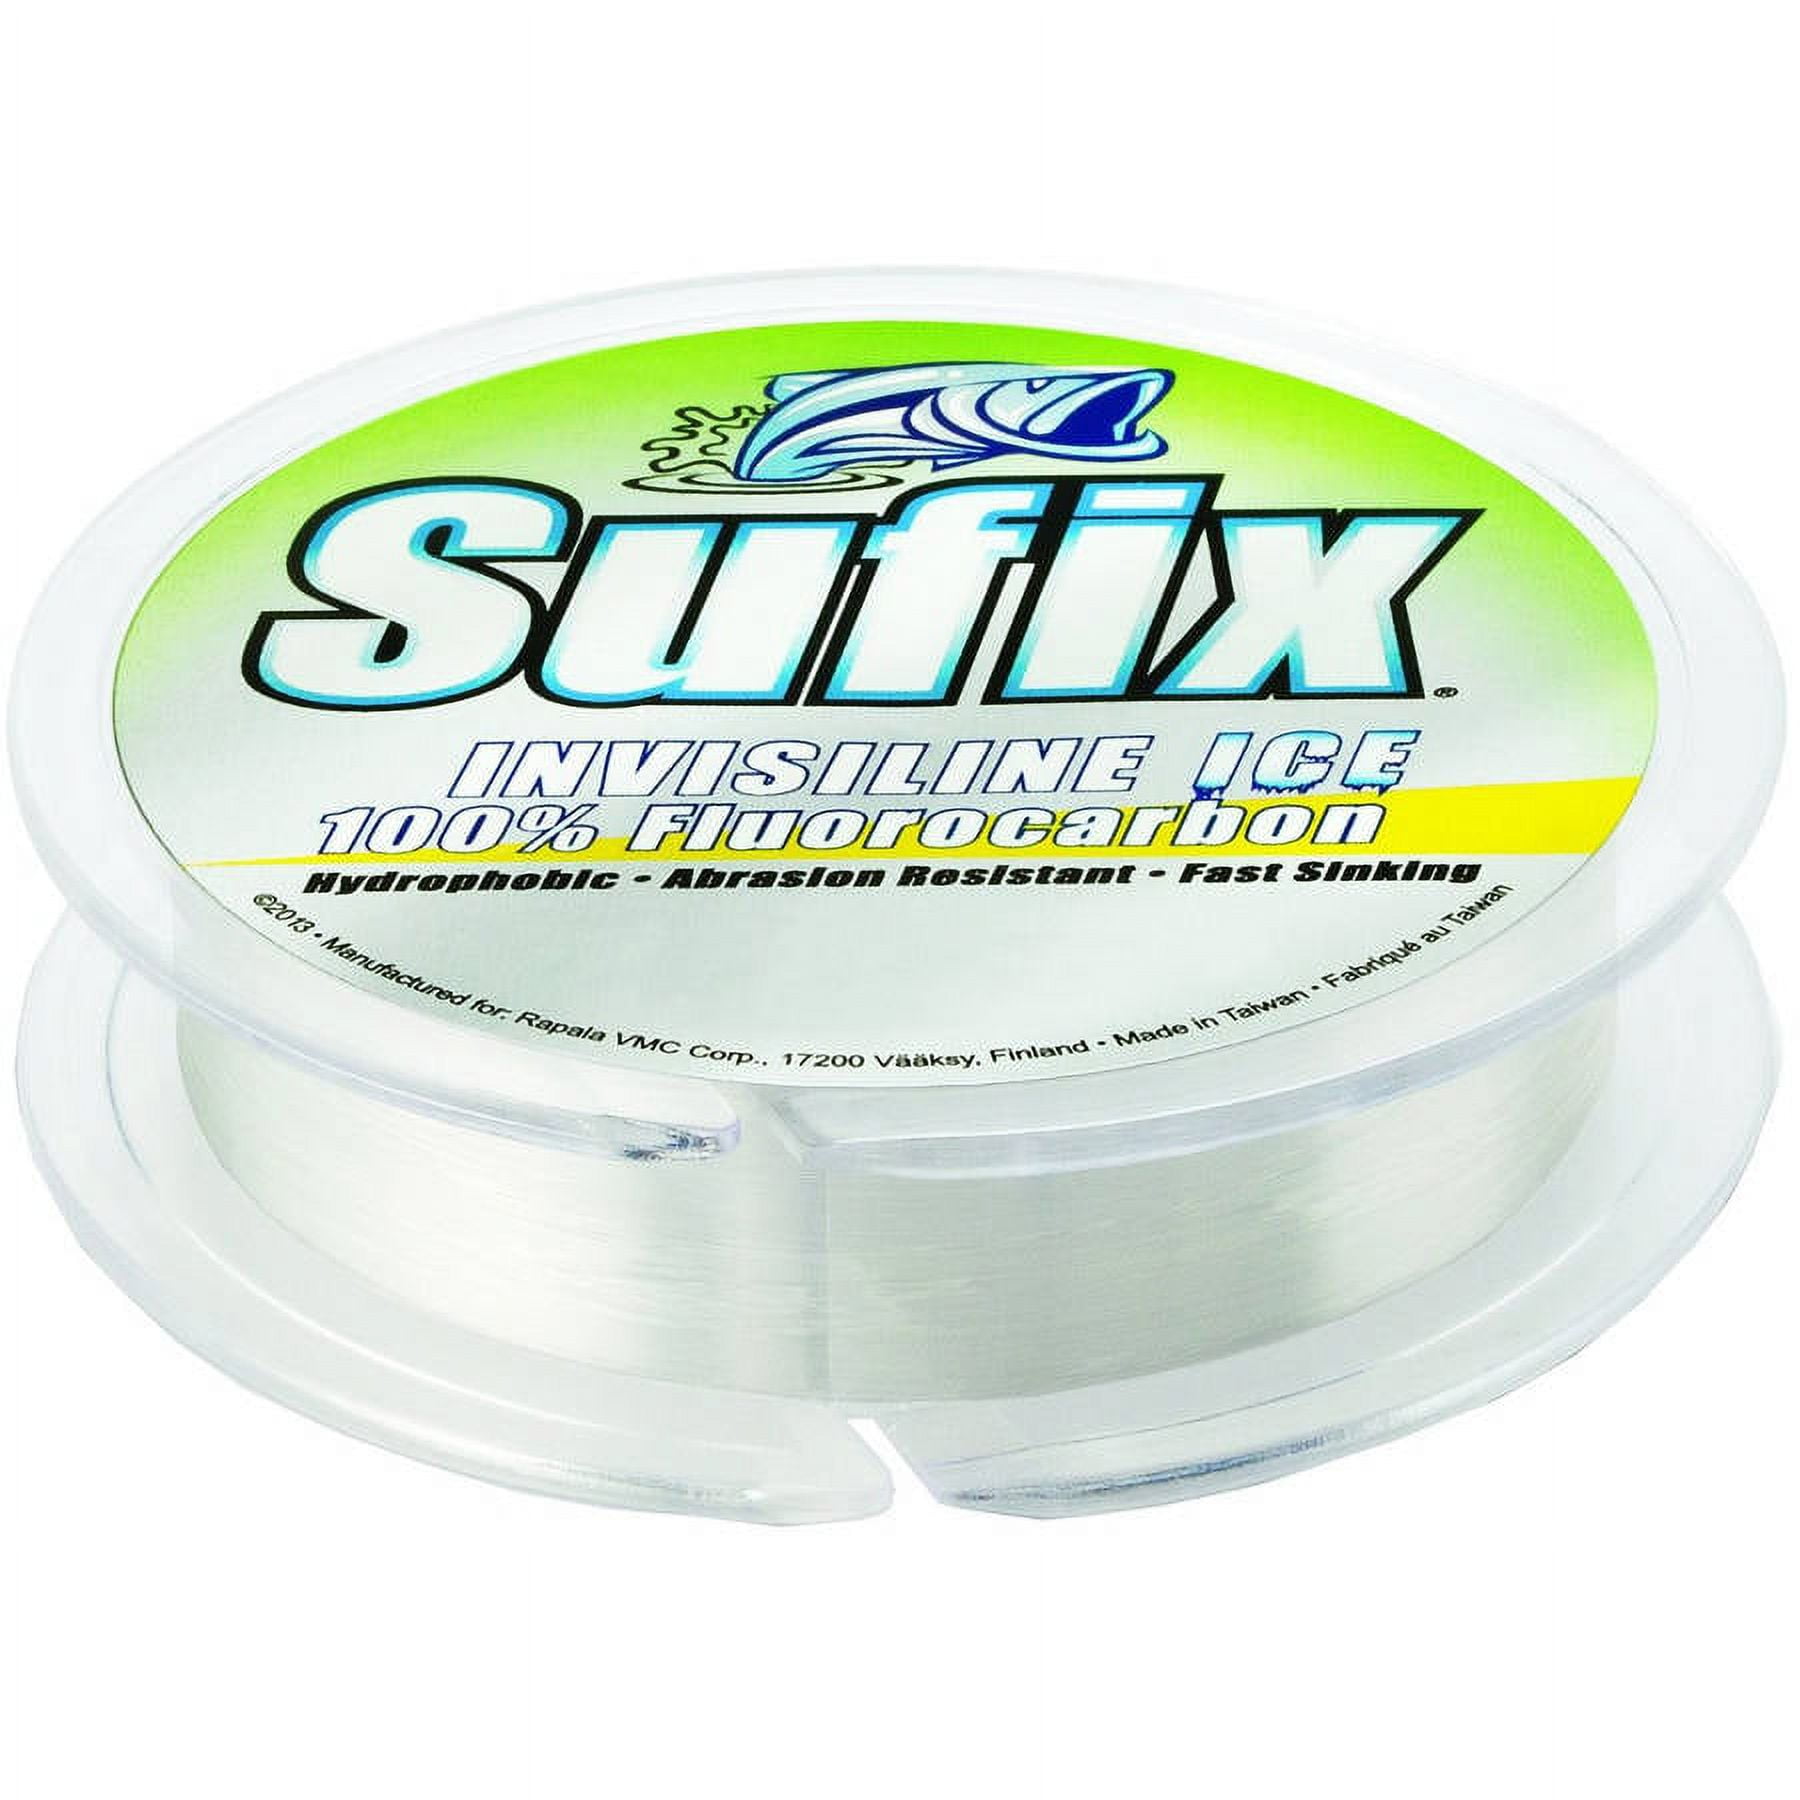 Sufix 50 Yard InvisiLine Ice Fluorocarbon Fishing Line - 6 lb. Test - Clear